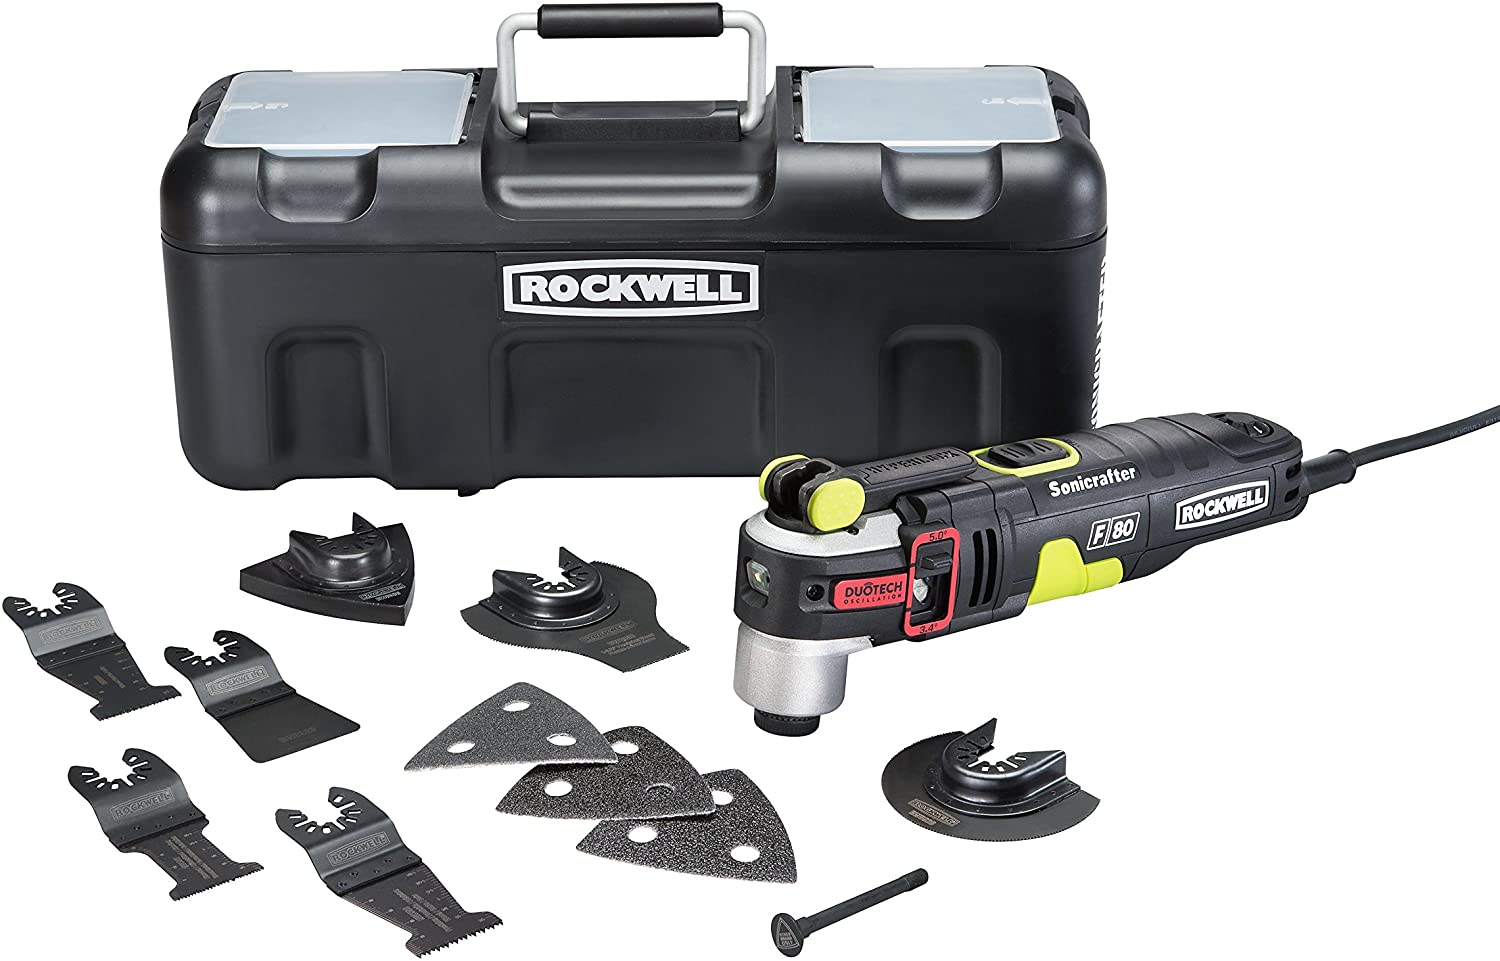 Rockwell RK5151K 4.2 Amp F80 Oscillating Multi-Tool $99.00 @ Amazon w/bag and 10 accessories